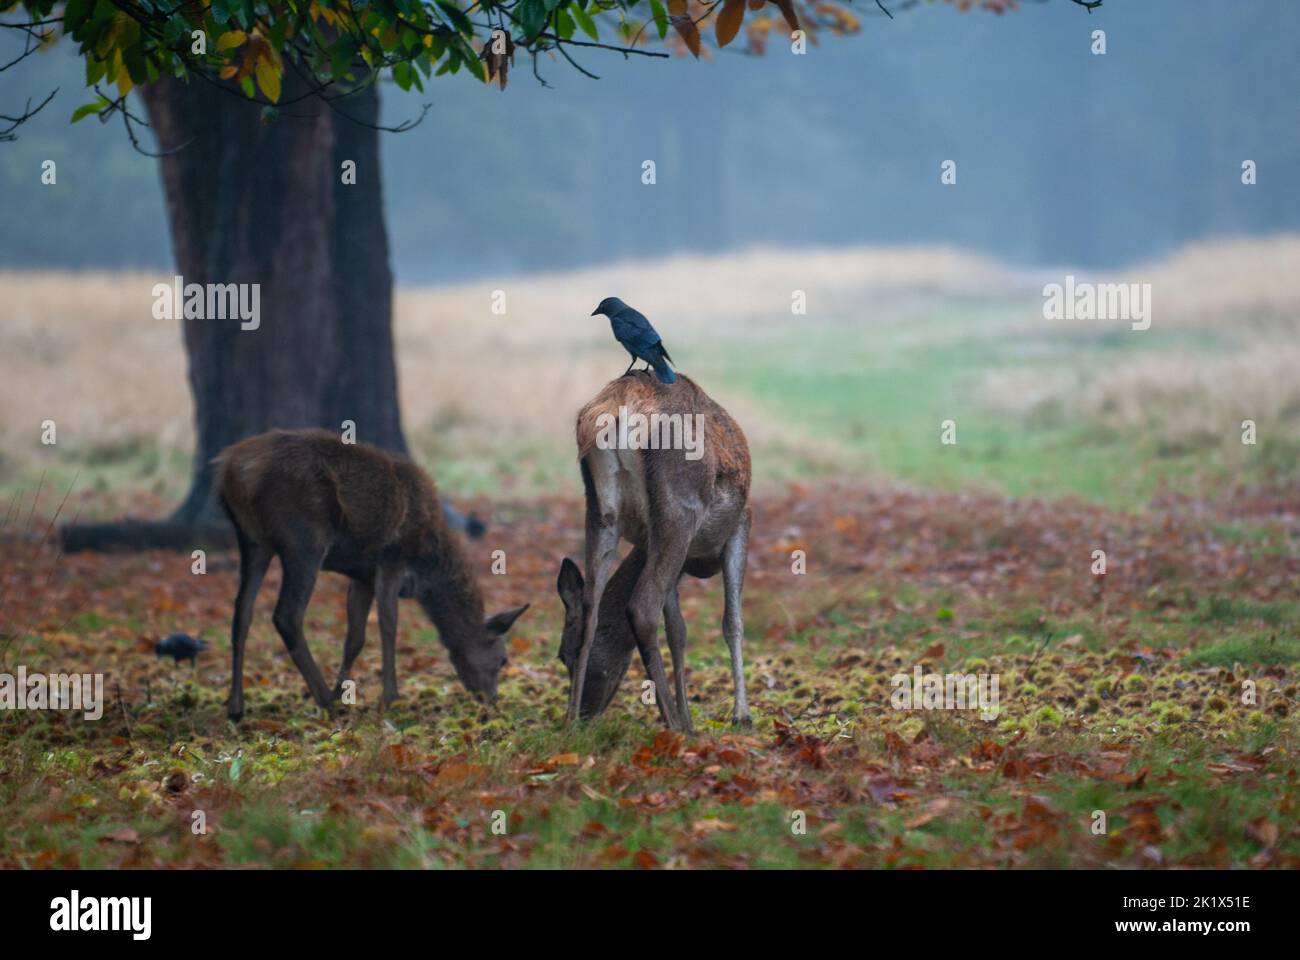 Deer at richmond Park in London Stock Photo